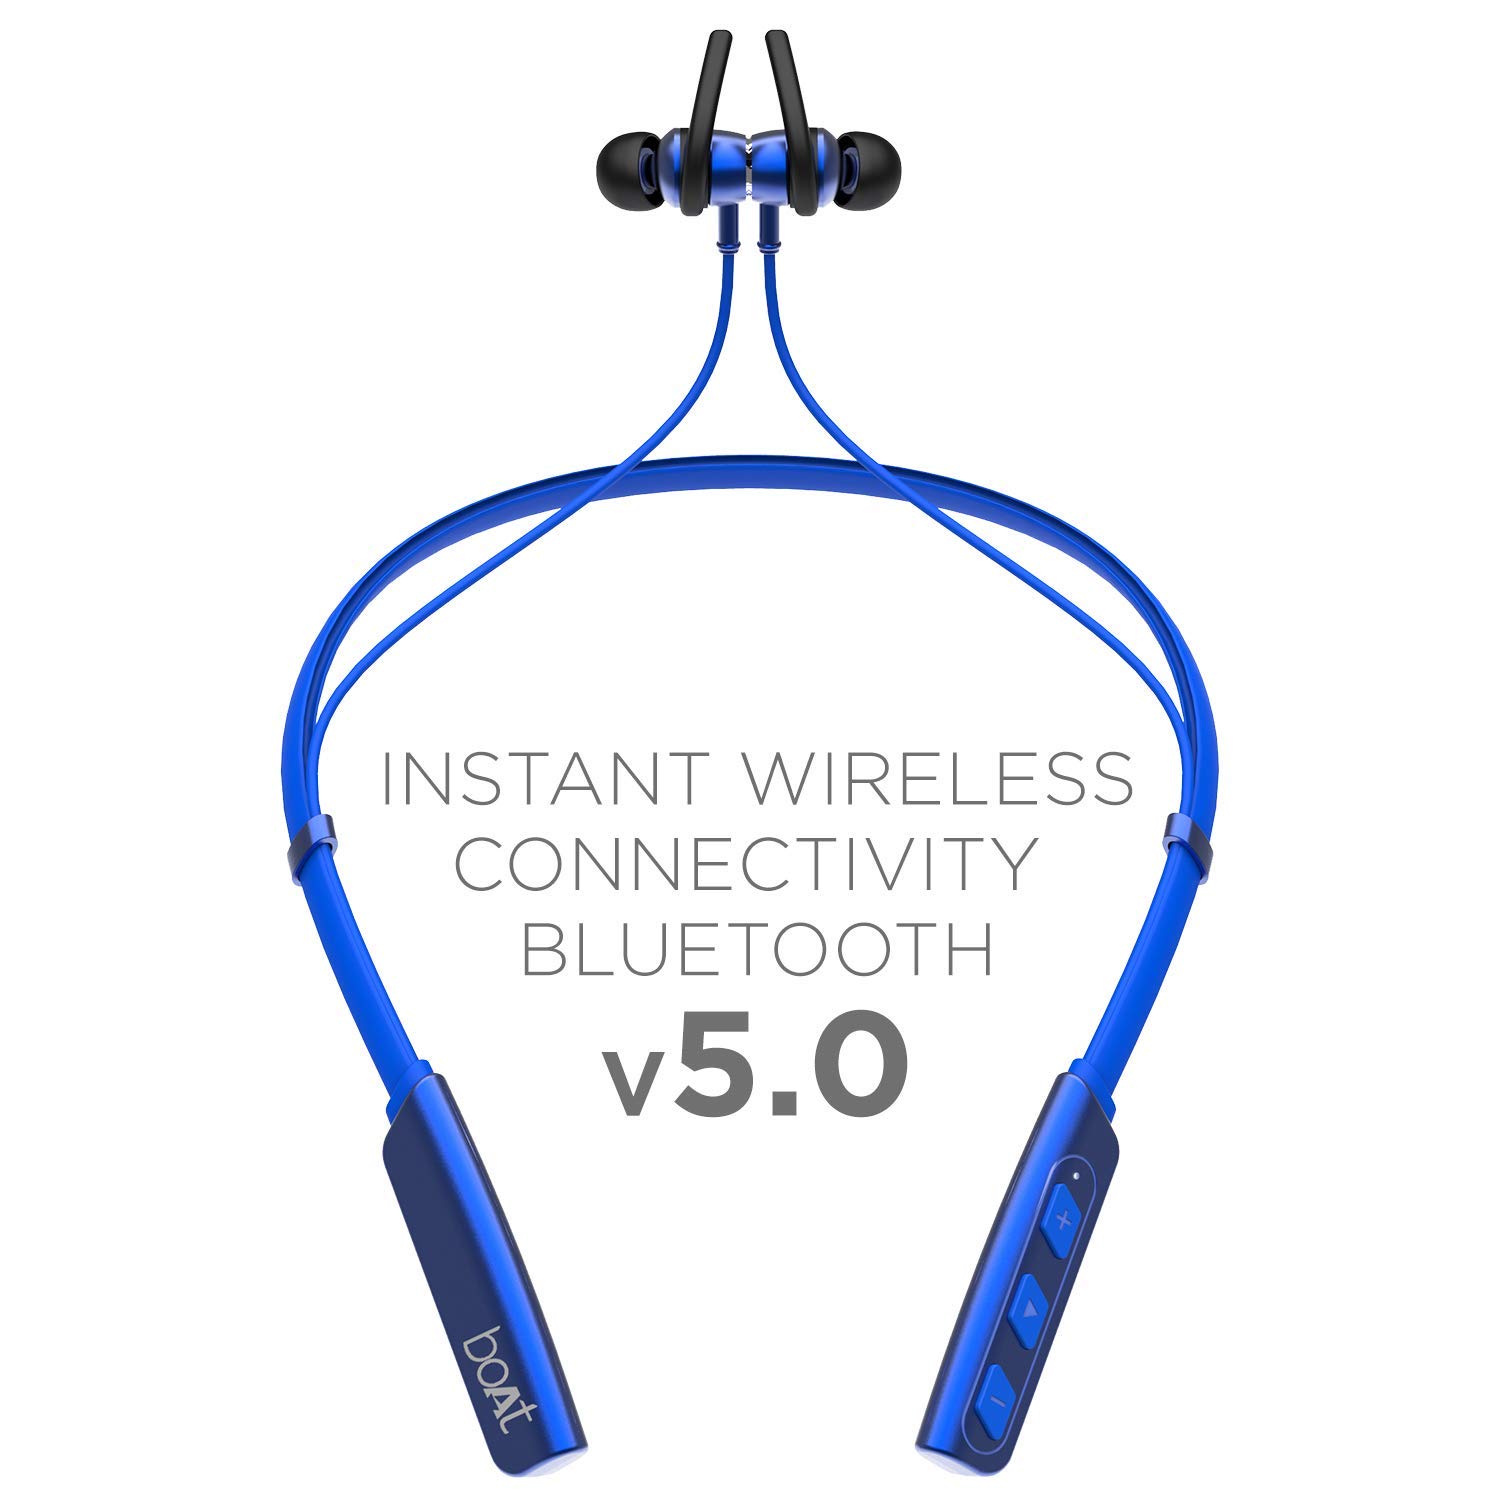 boAt Rockerz 235V2 Bluetooth Wireless In Ear Earphones With Mic With Asap Charge Technology, V5.0, Call Vibration Alert, Magnetic Eartips And Ipx5 Water & Sweat Resistance (Blue) - image 4 of 5